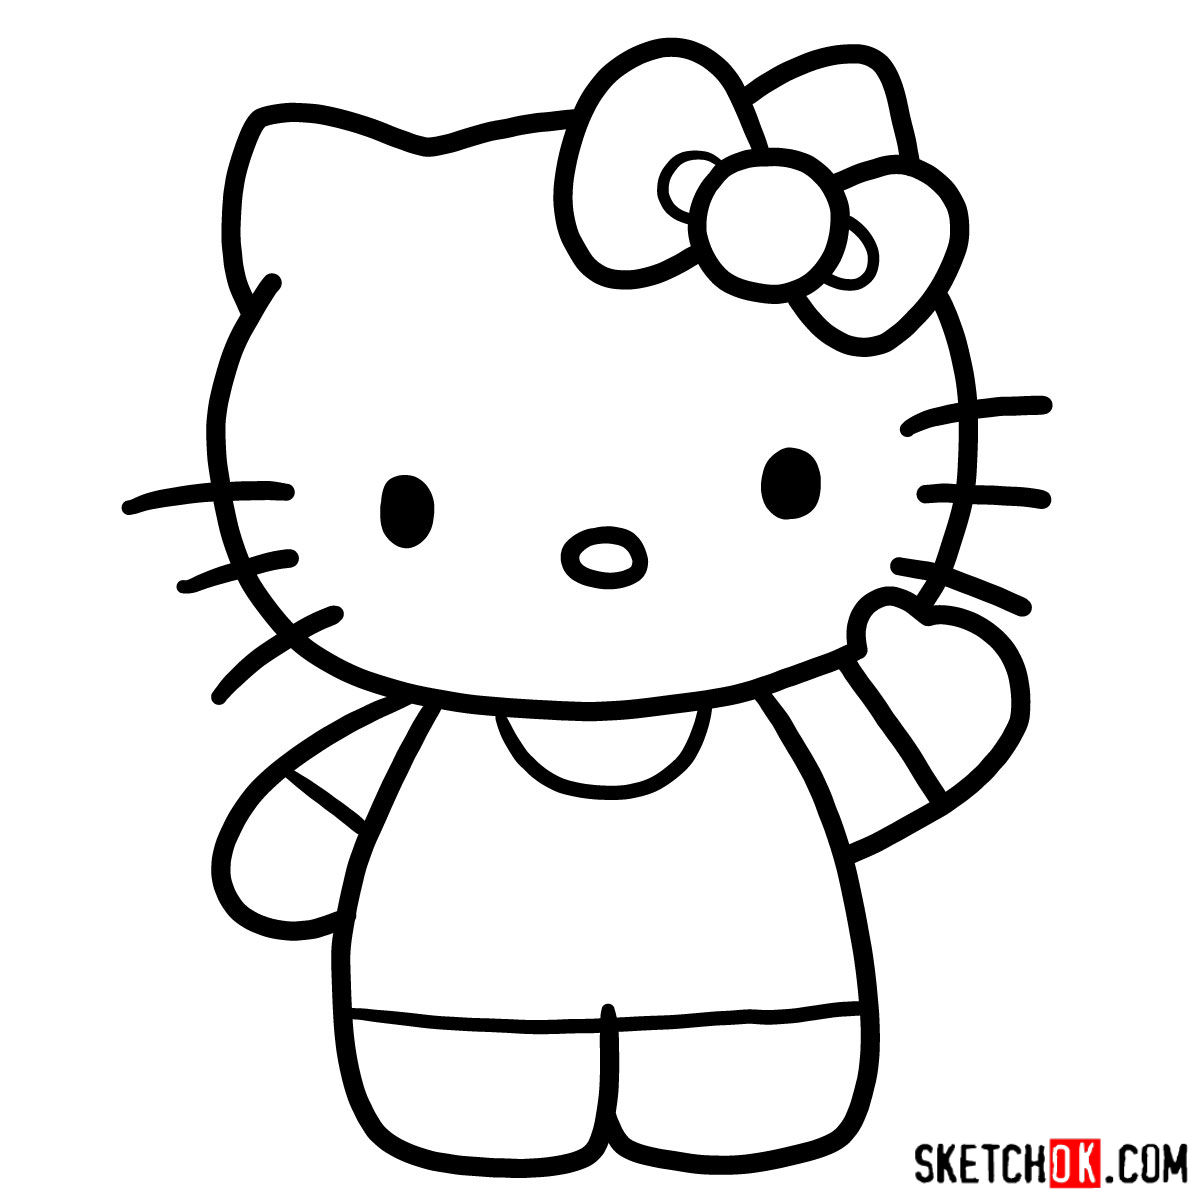 How to draw Hello Kitty - step 07